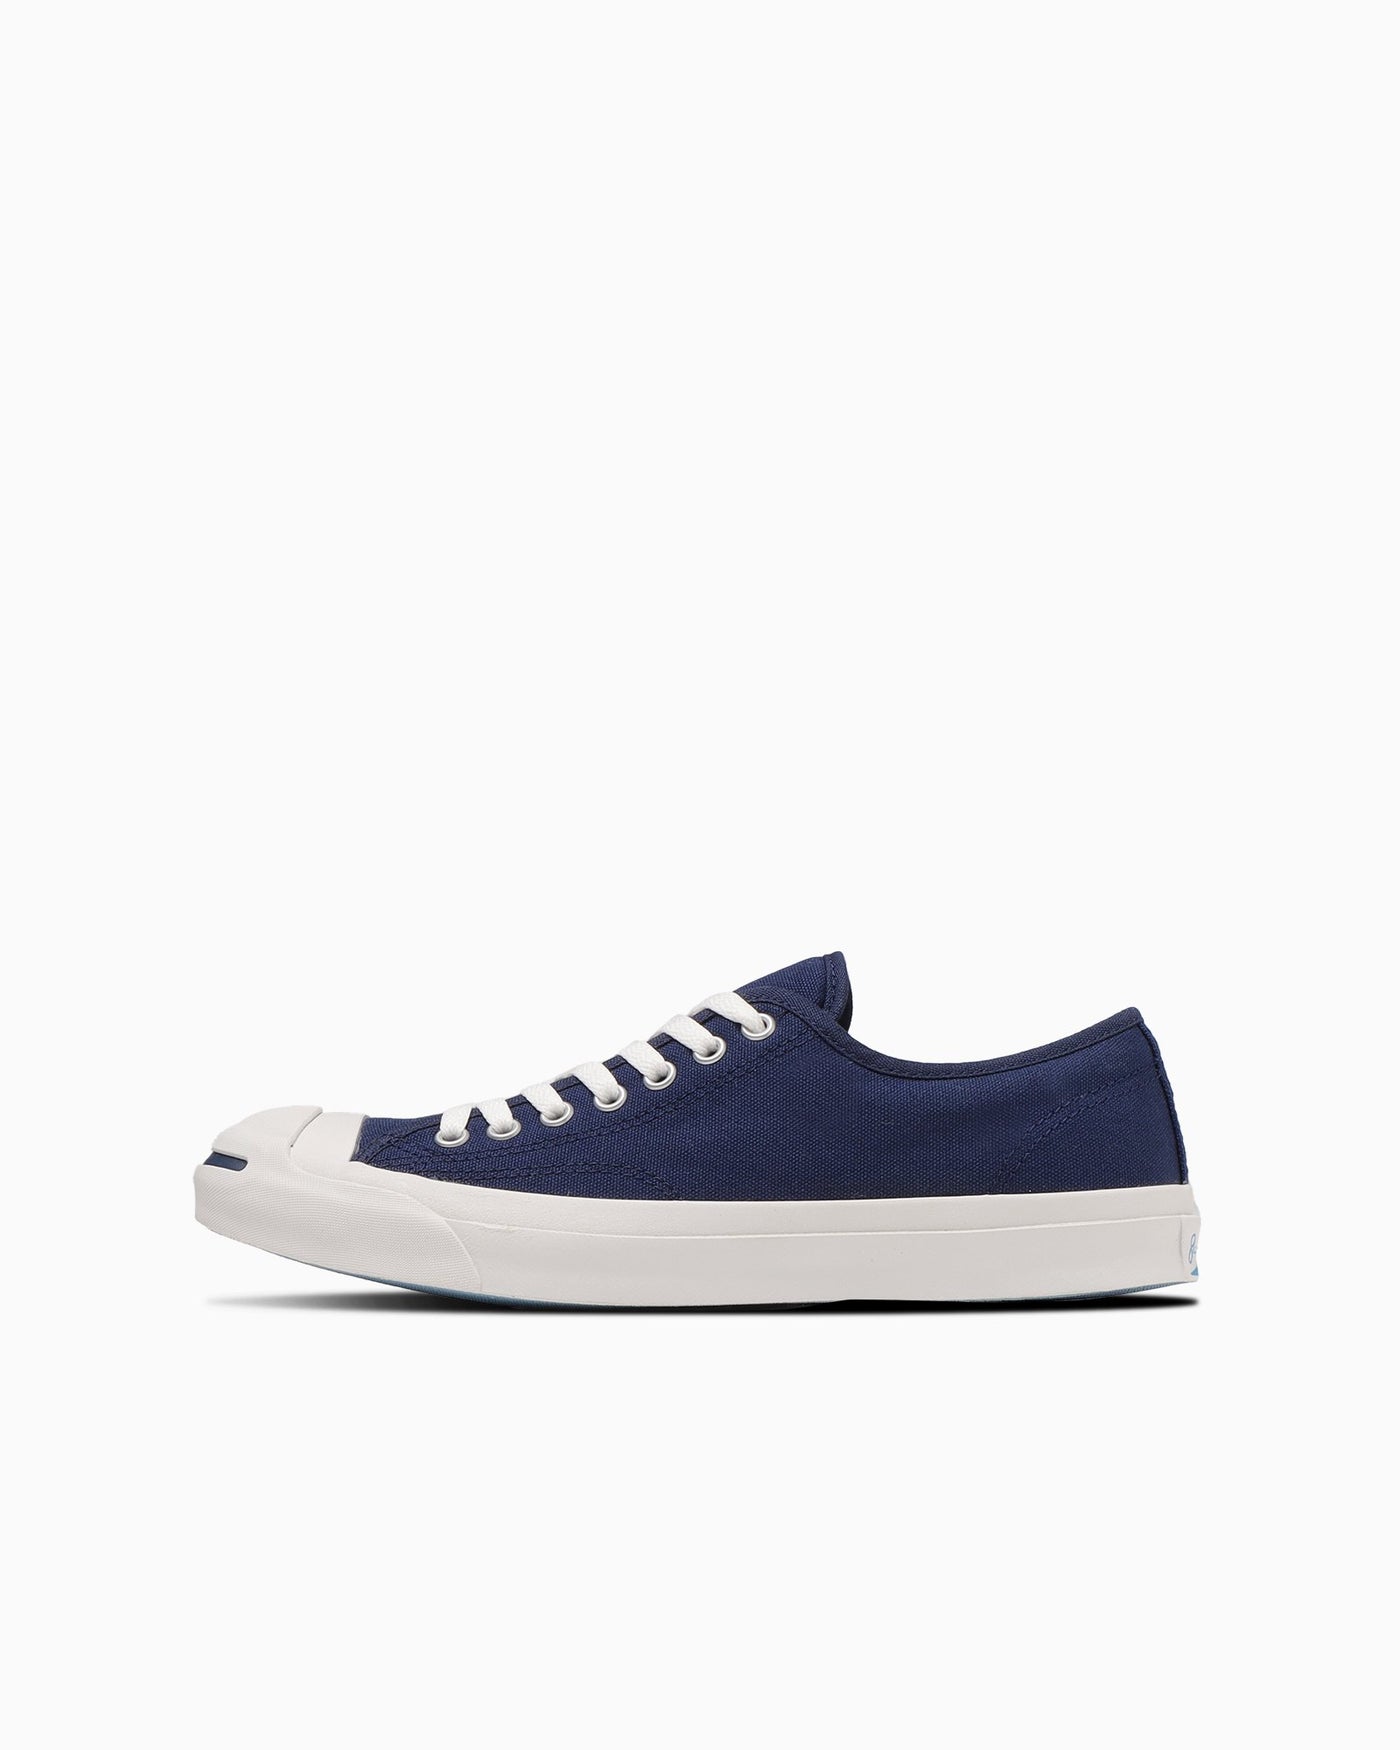 JACK PURCELL